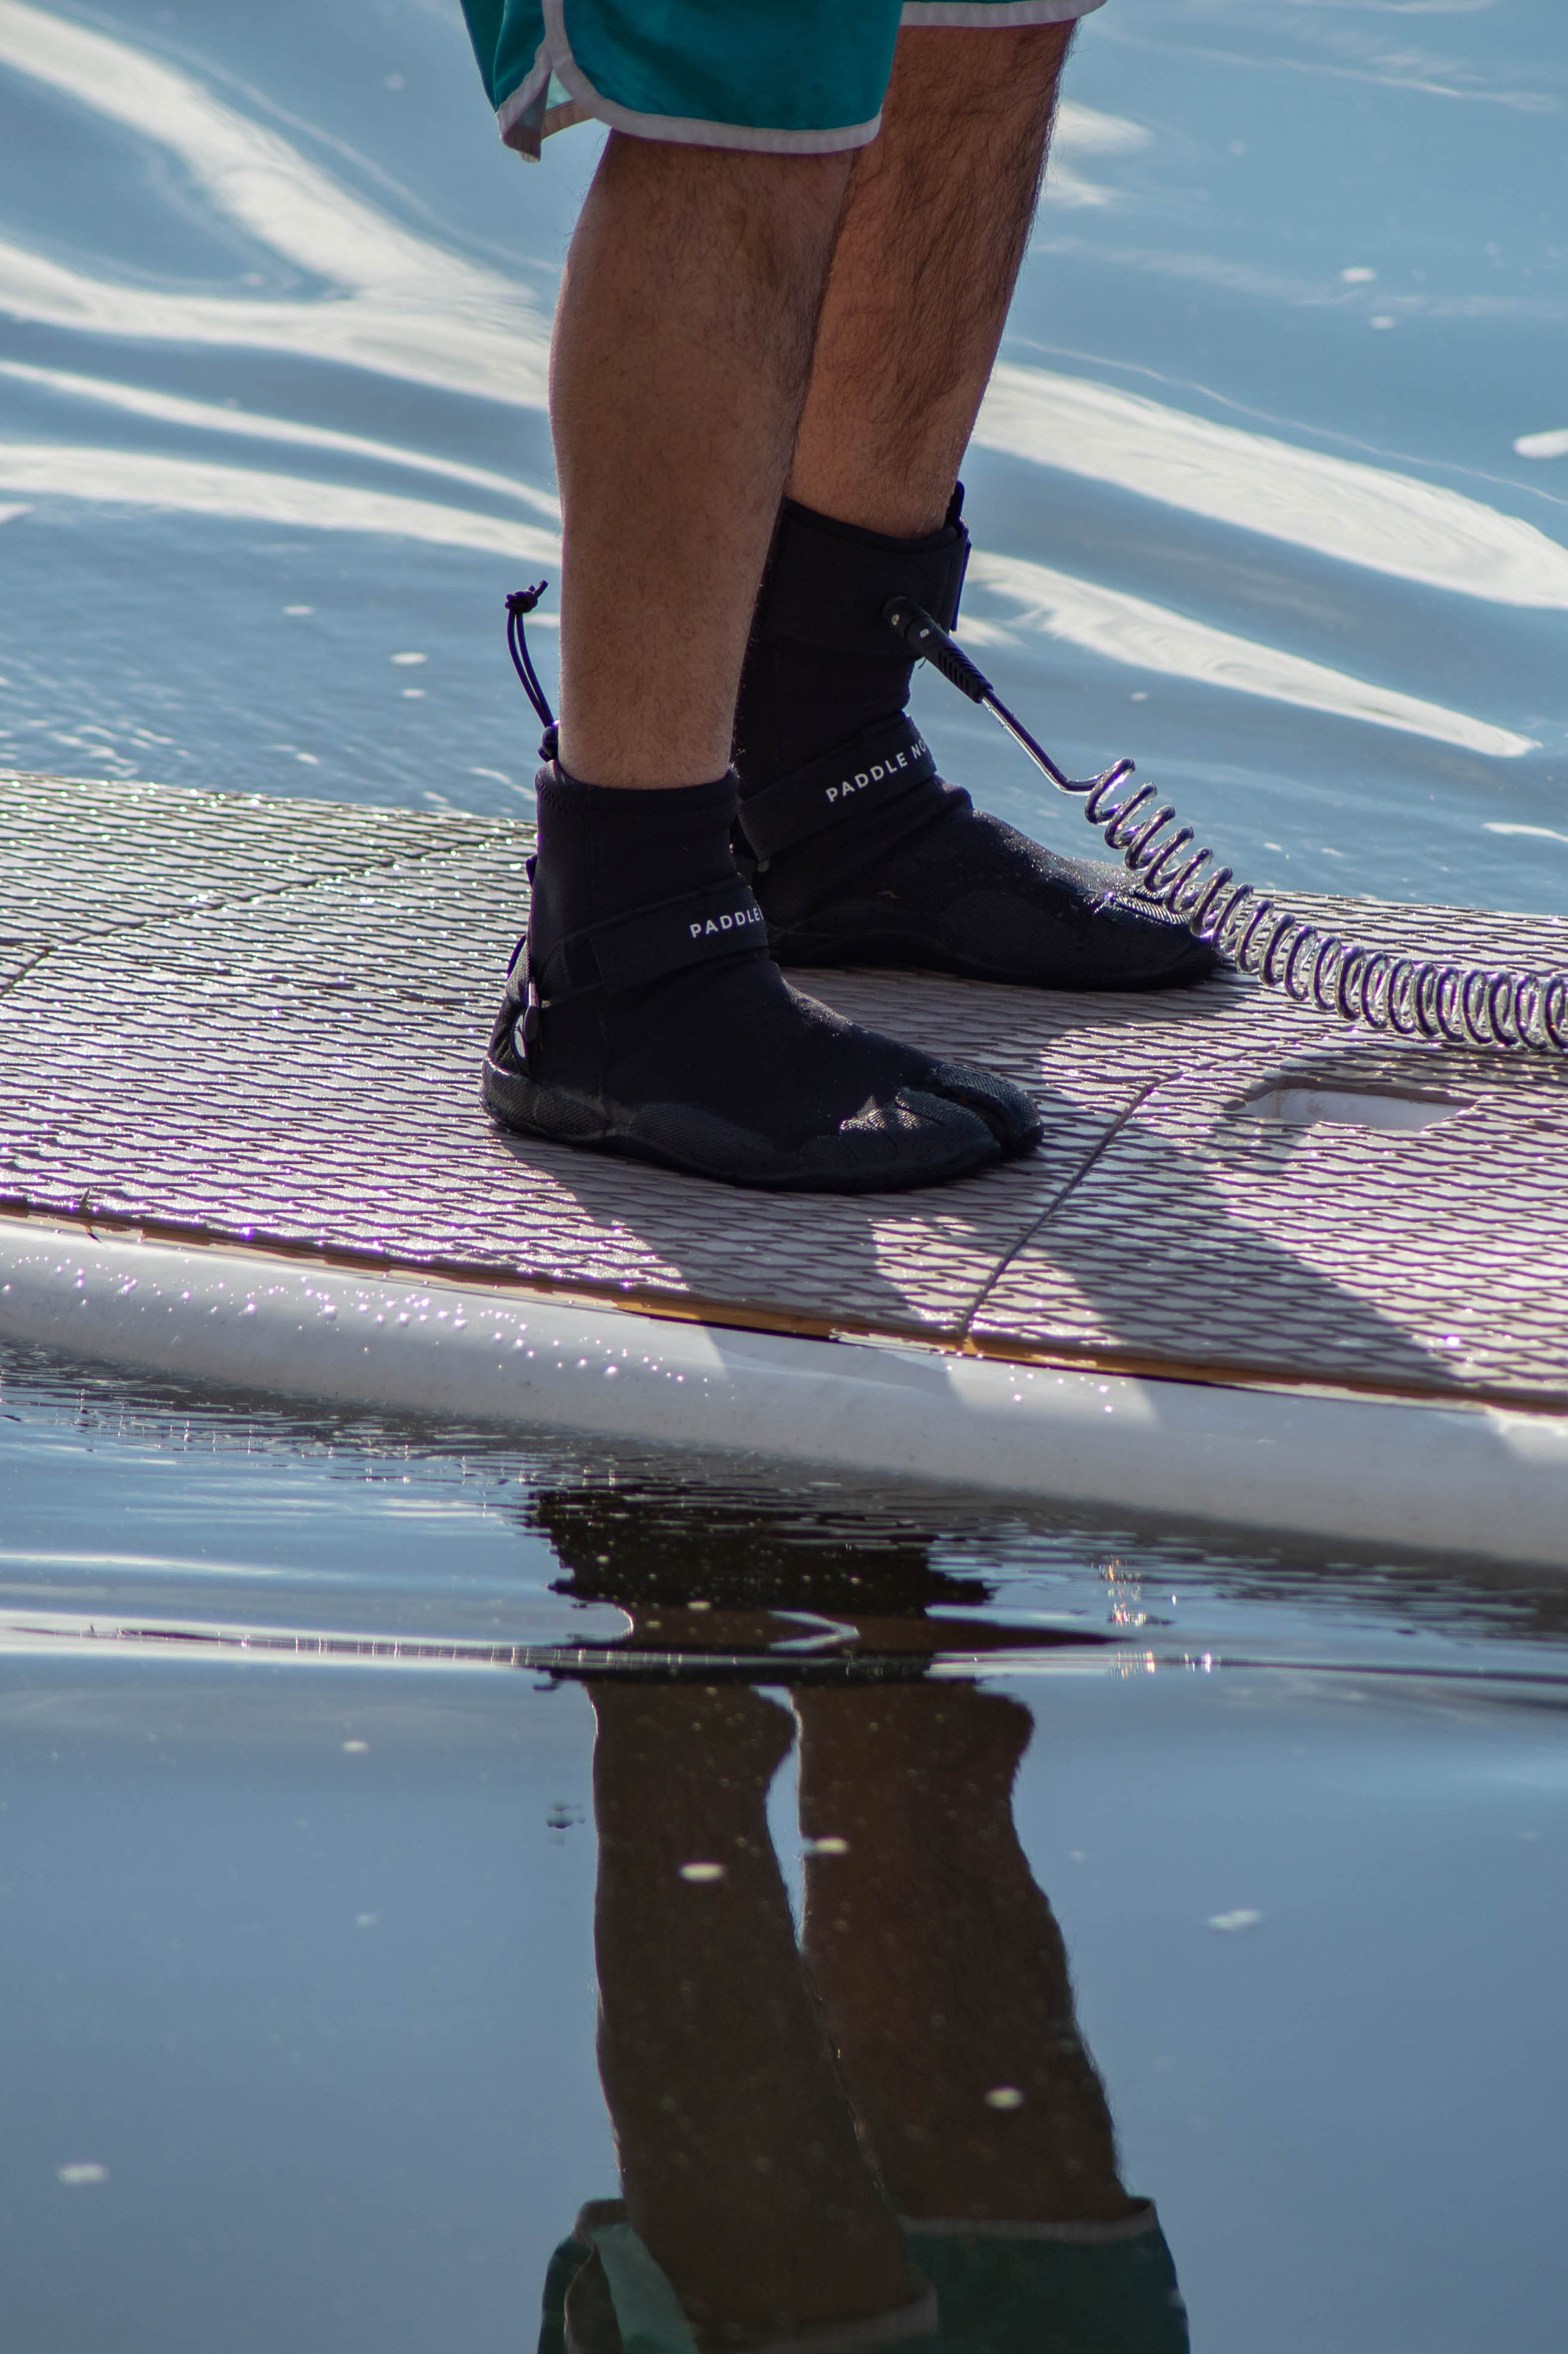 Paddle board accessories: person standing on a paddle board in the water wearing water shoes and Paddle North SUP Leash attached to their ankle.